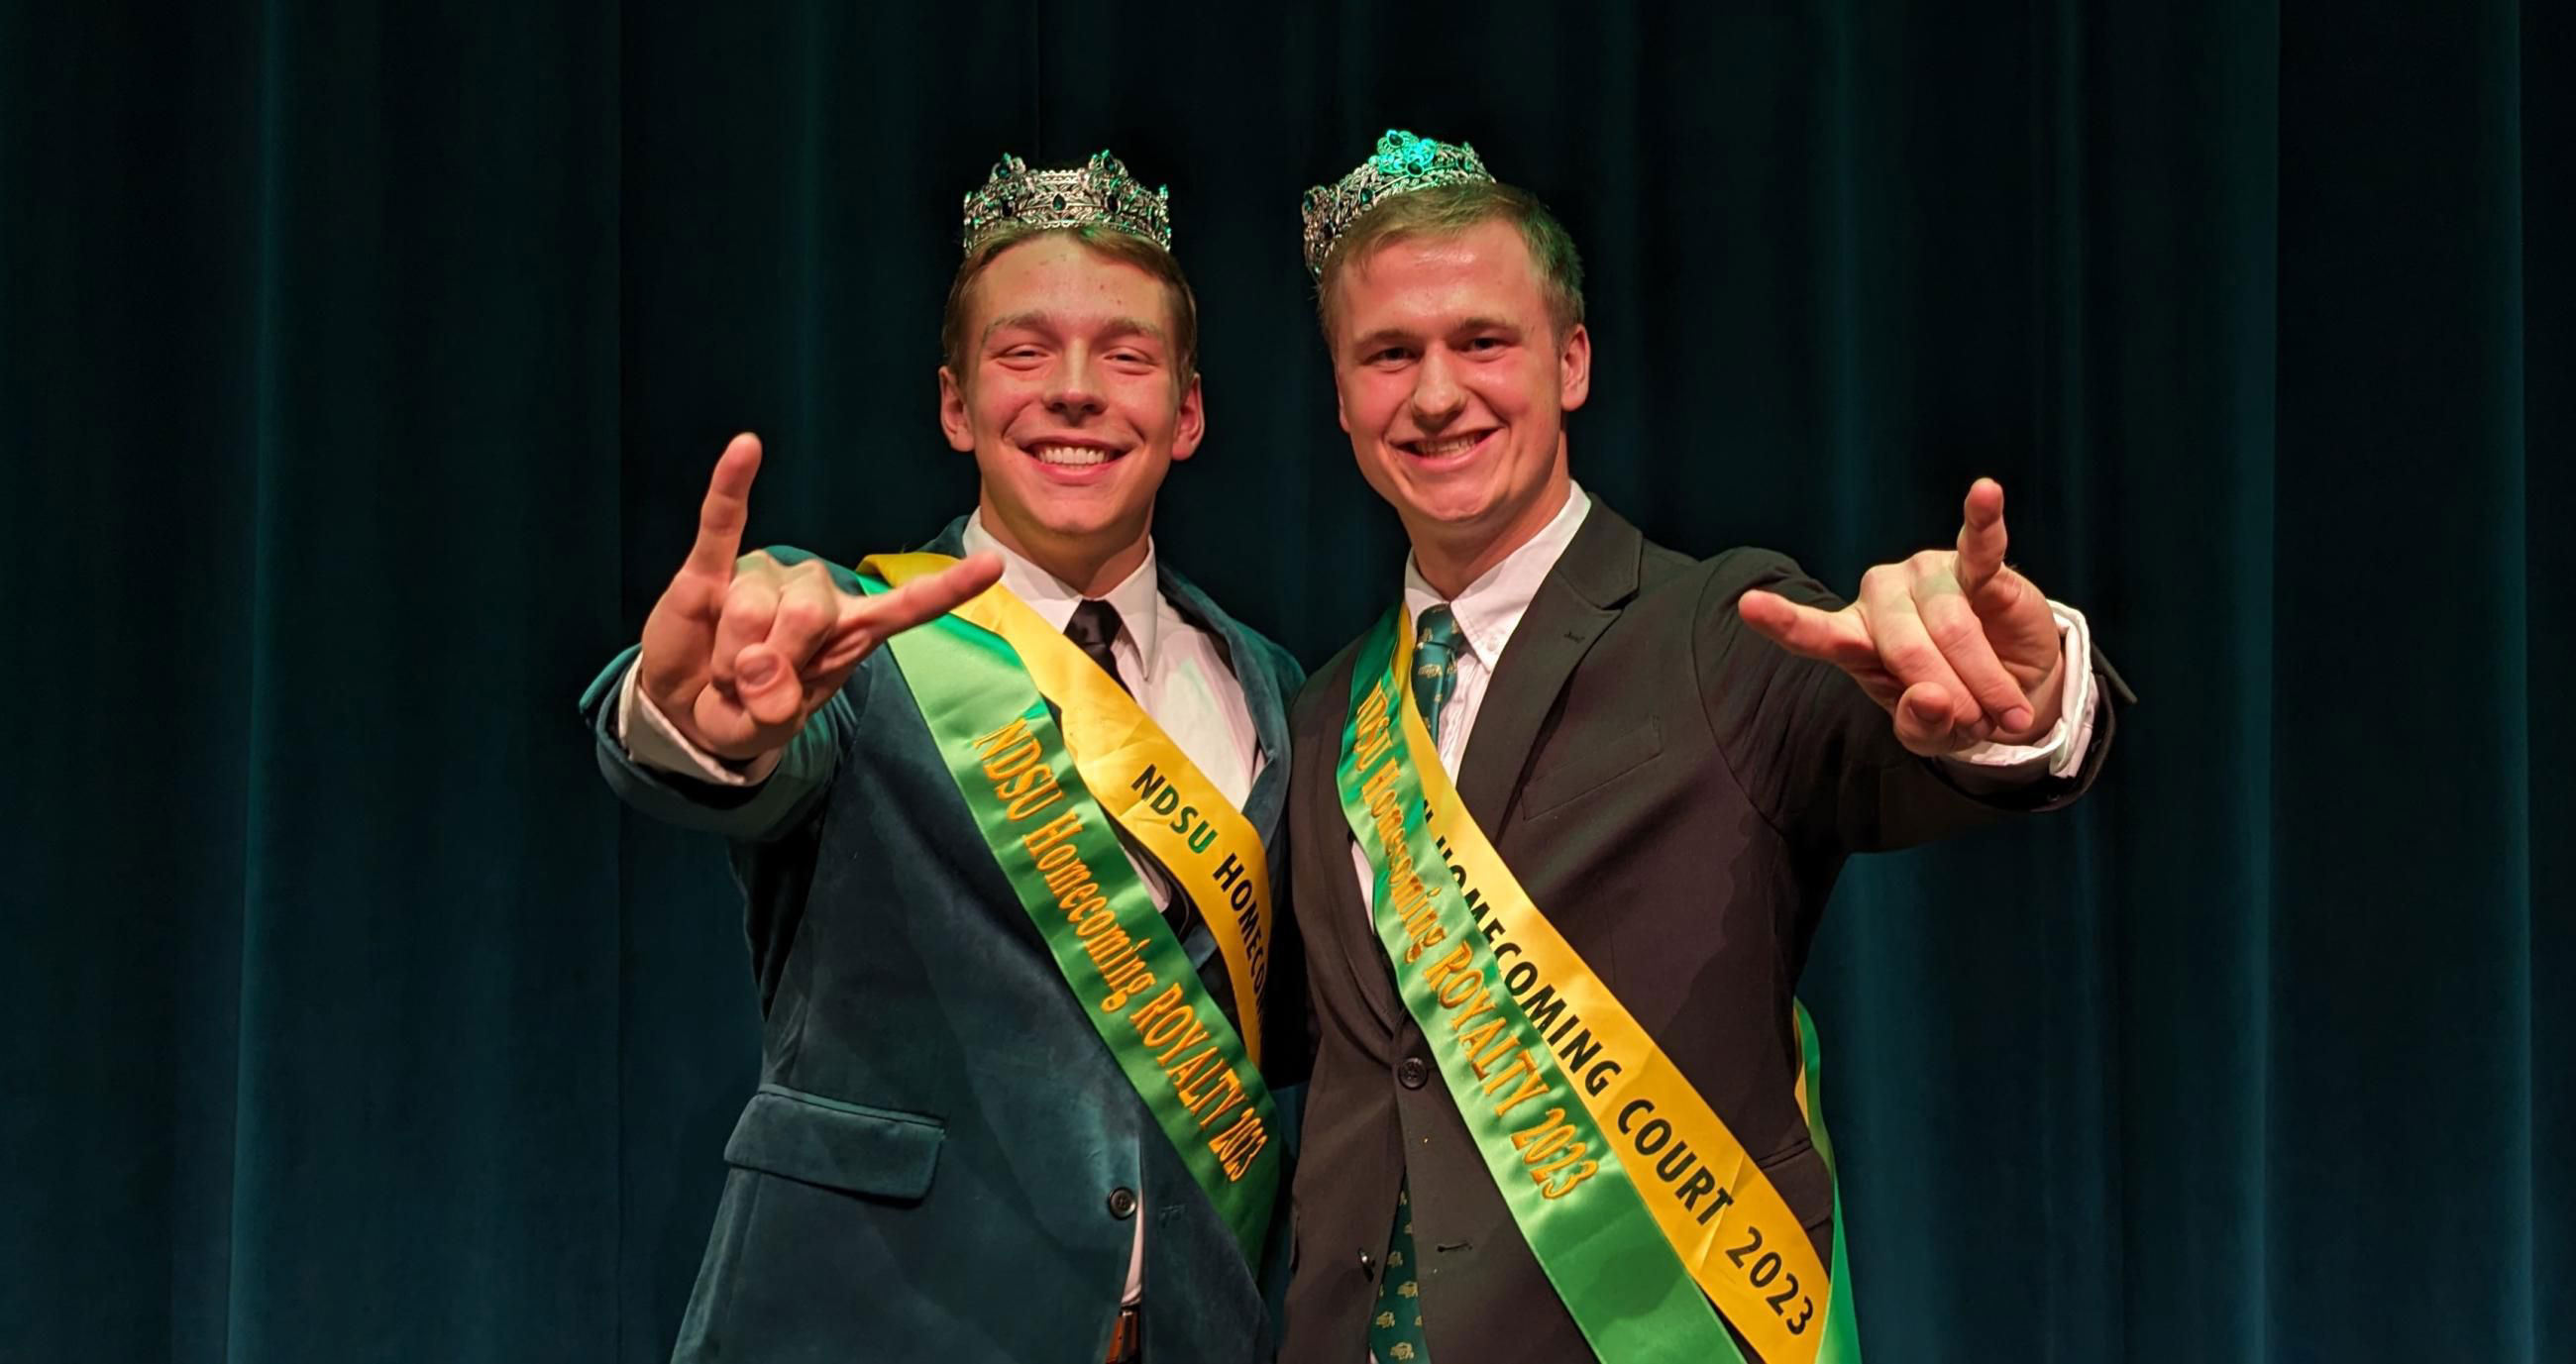 Petition started to require NDSU to elect king and queen